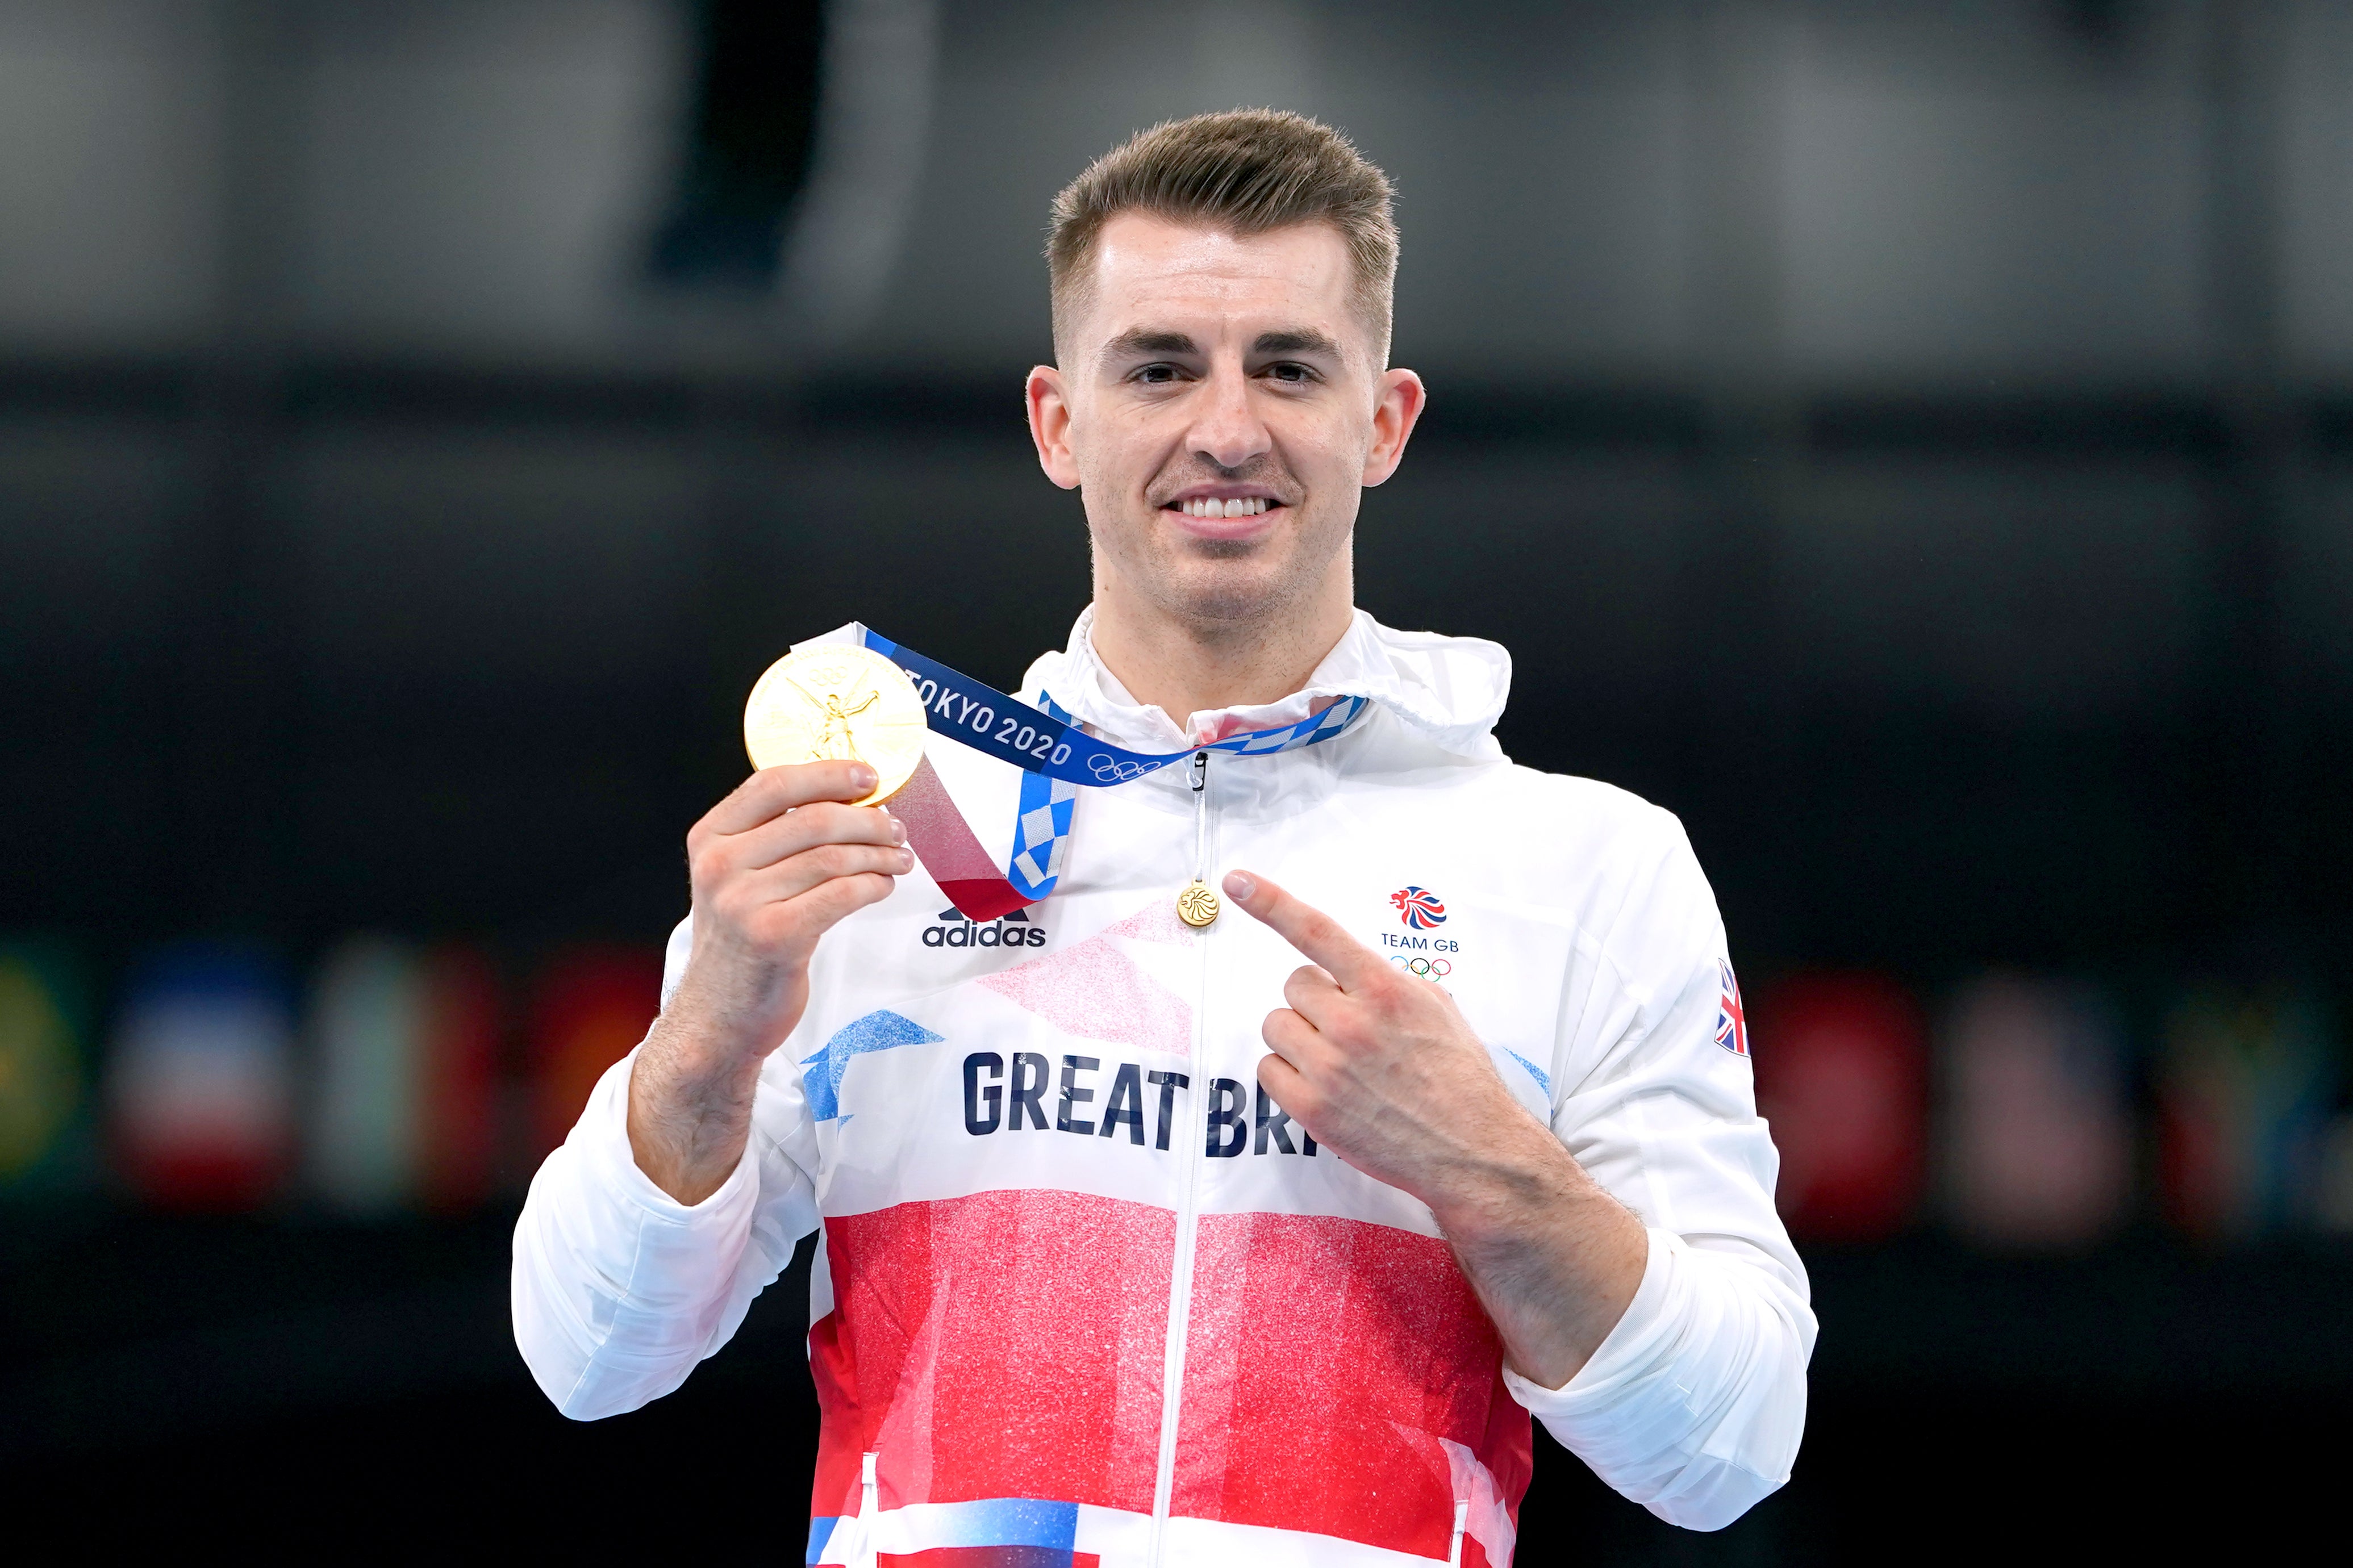 Max Whitlock celebrates with his gold medal after winning the men’s pommel horse final in Tokyo